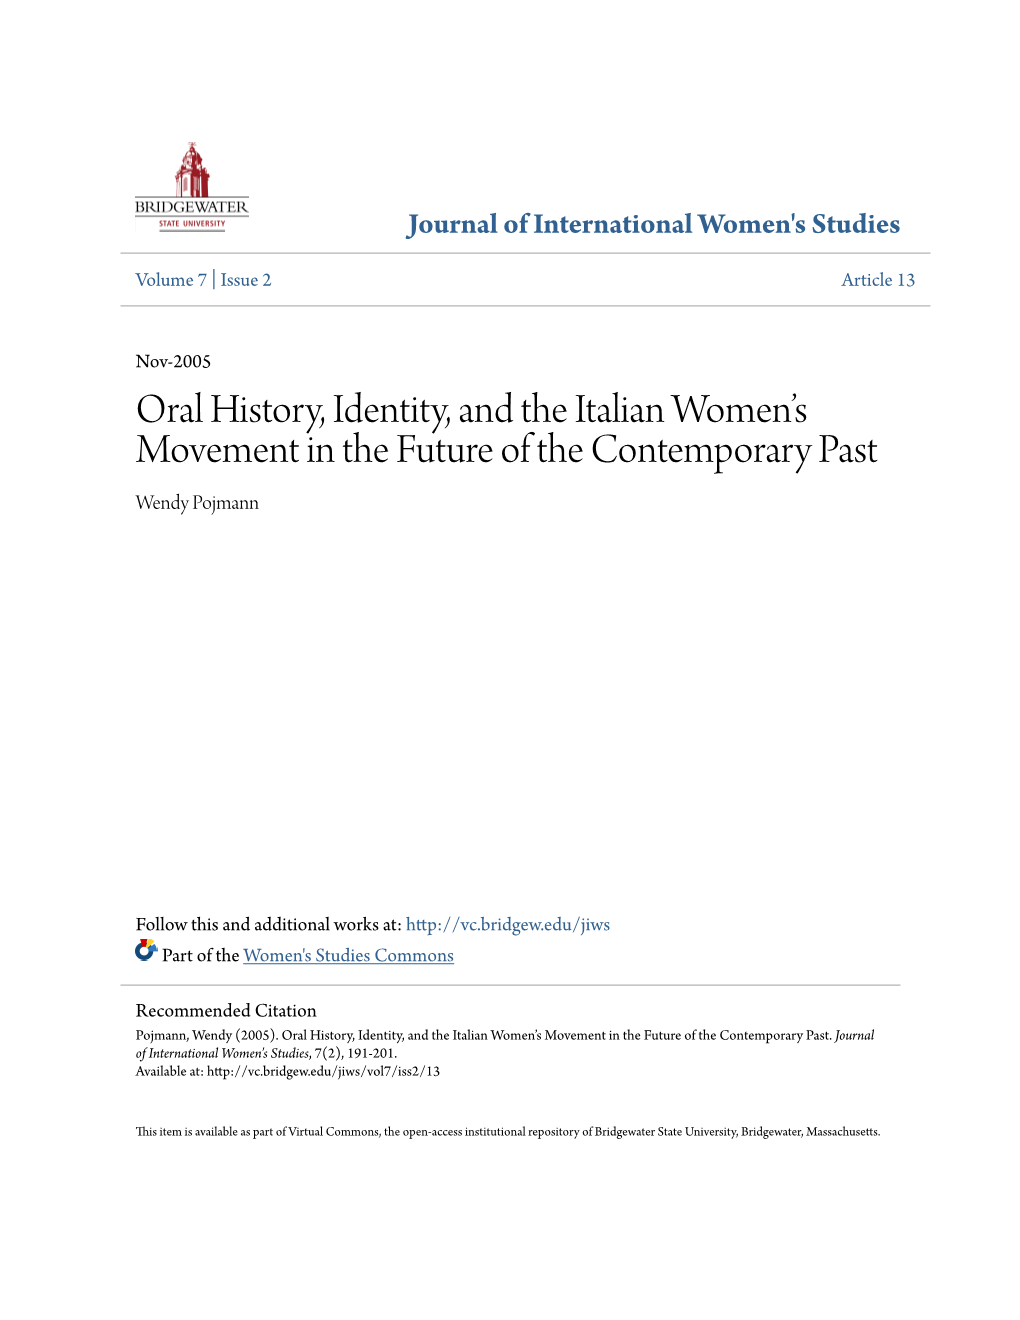 Oral History, Identity, and the Italian Women's Movement in the Future Of